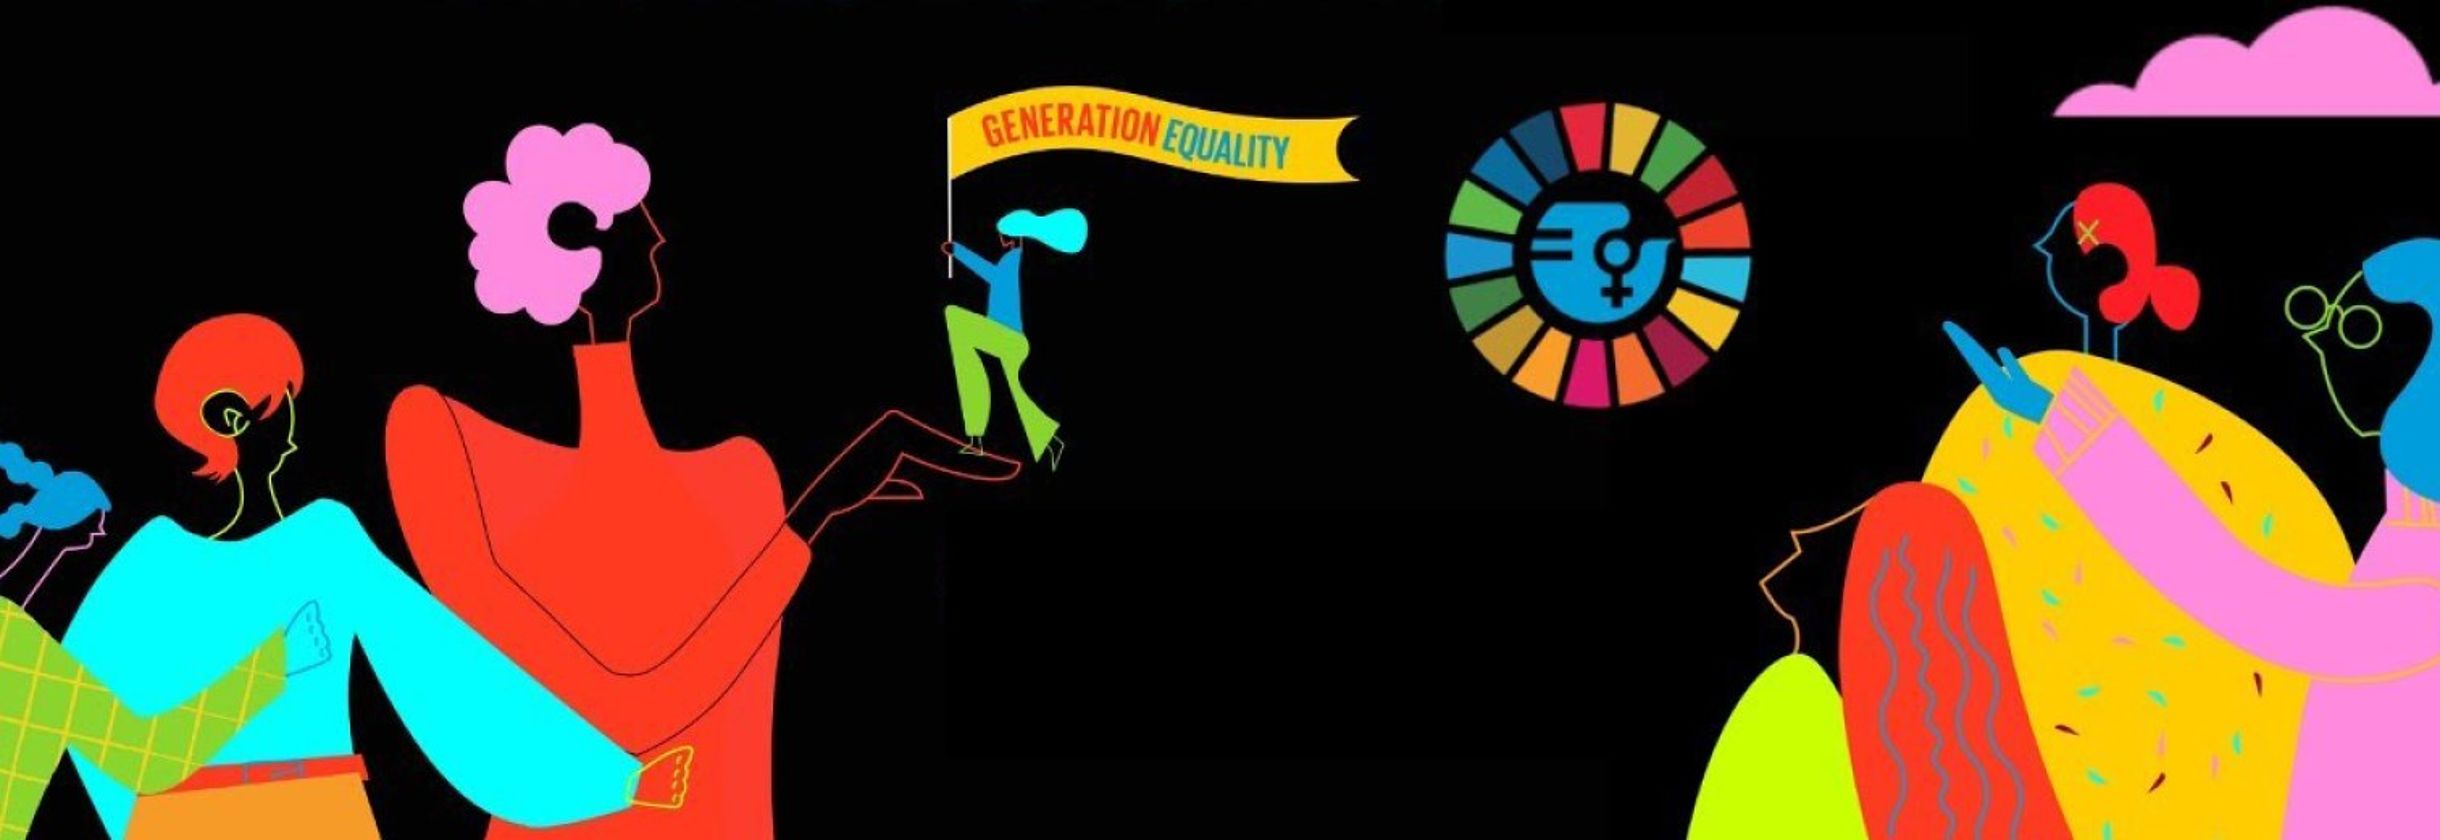 logo shows "gender equality" as a "sustainable development goal